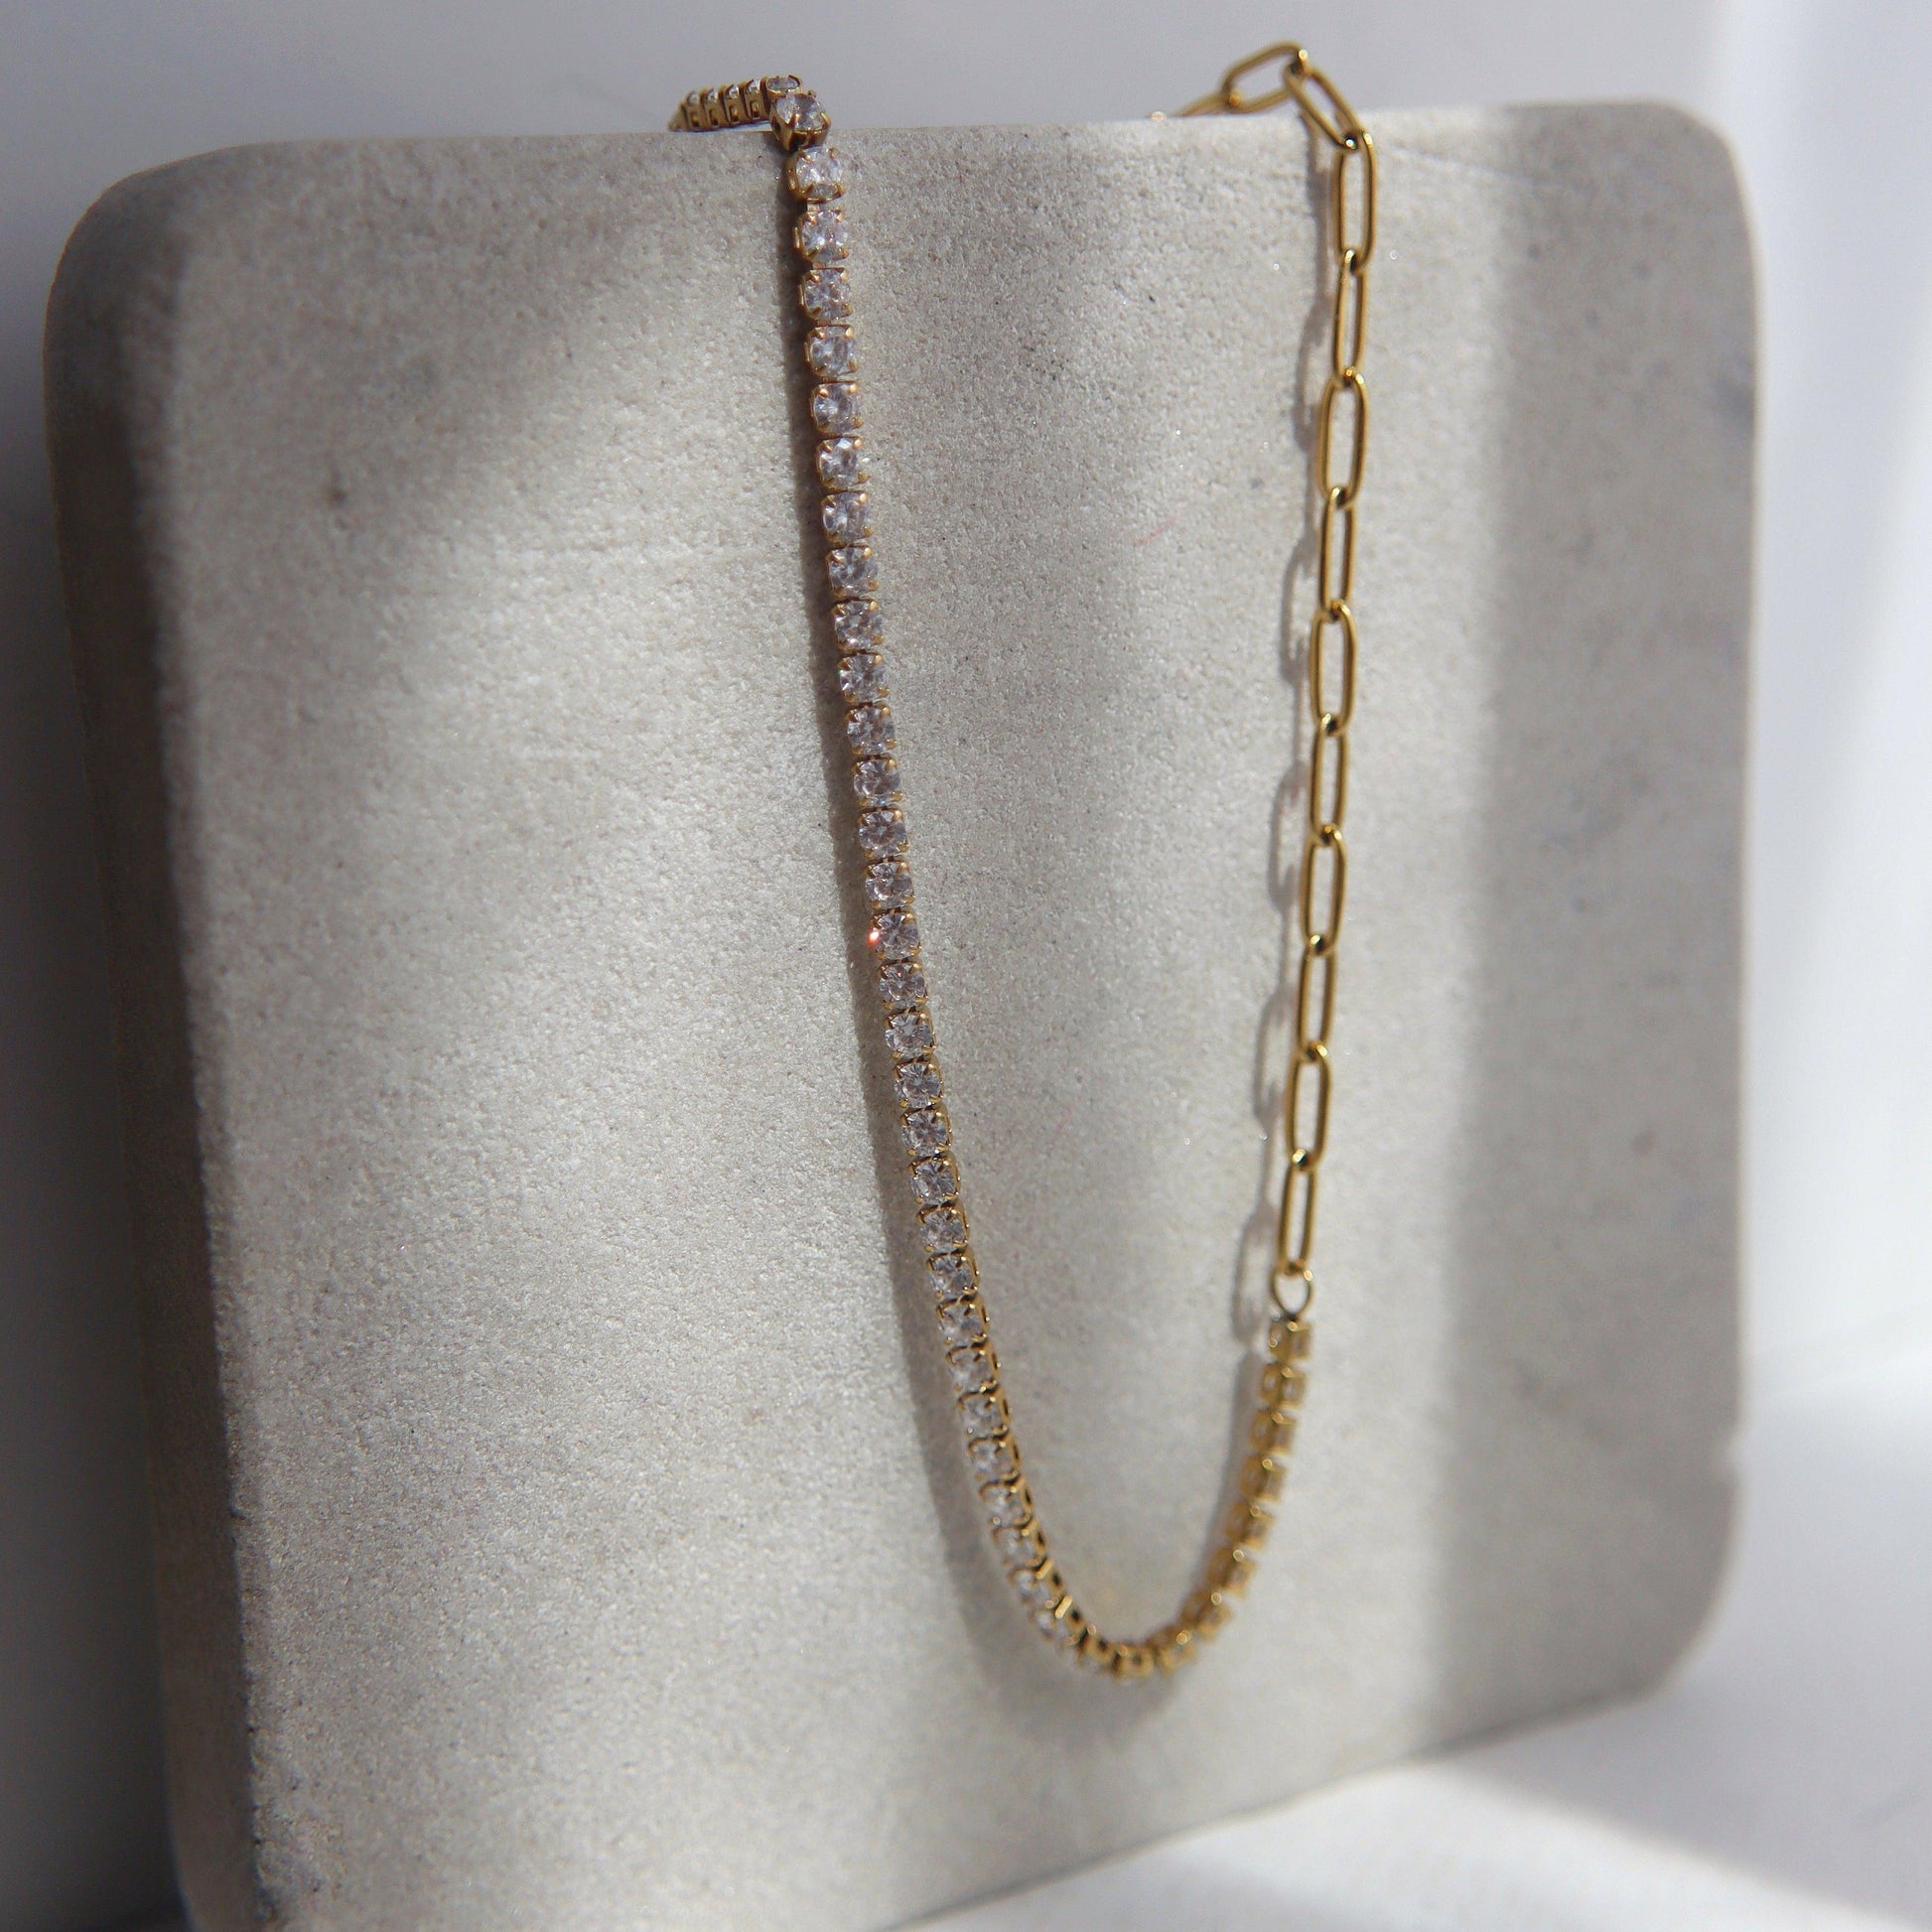 Celine Necklace | CZ Paperclip Necklace - JESSA JEWELRY | GOLD JEWELRY; dainty, affordable gold everyday jewelry. Tarnish free, water-resistant, hypoallergenic. Jewelry for everyday wear